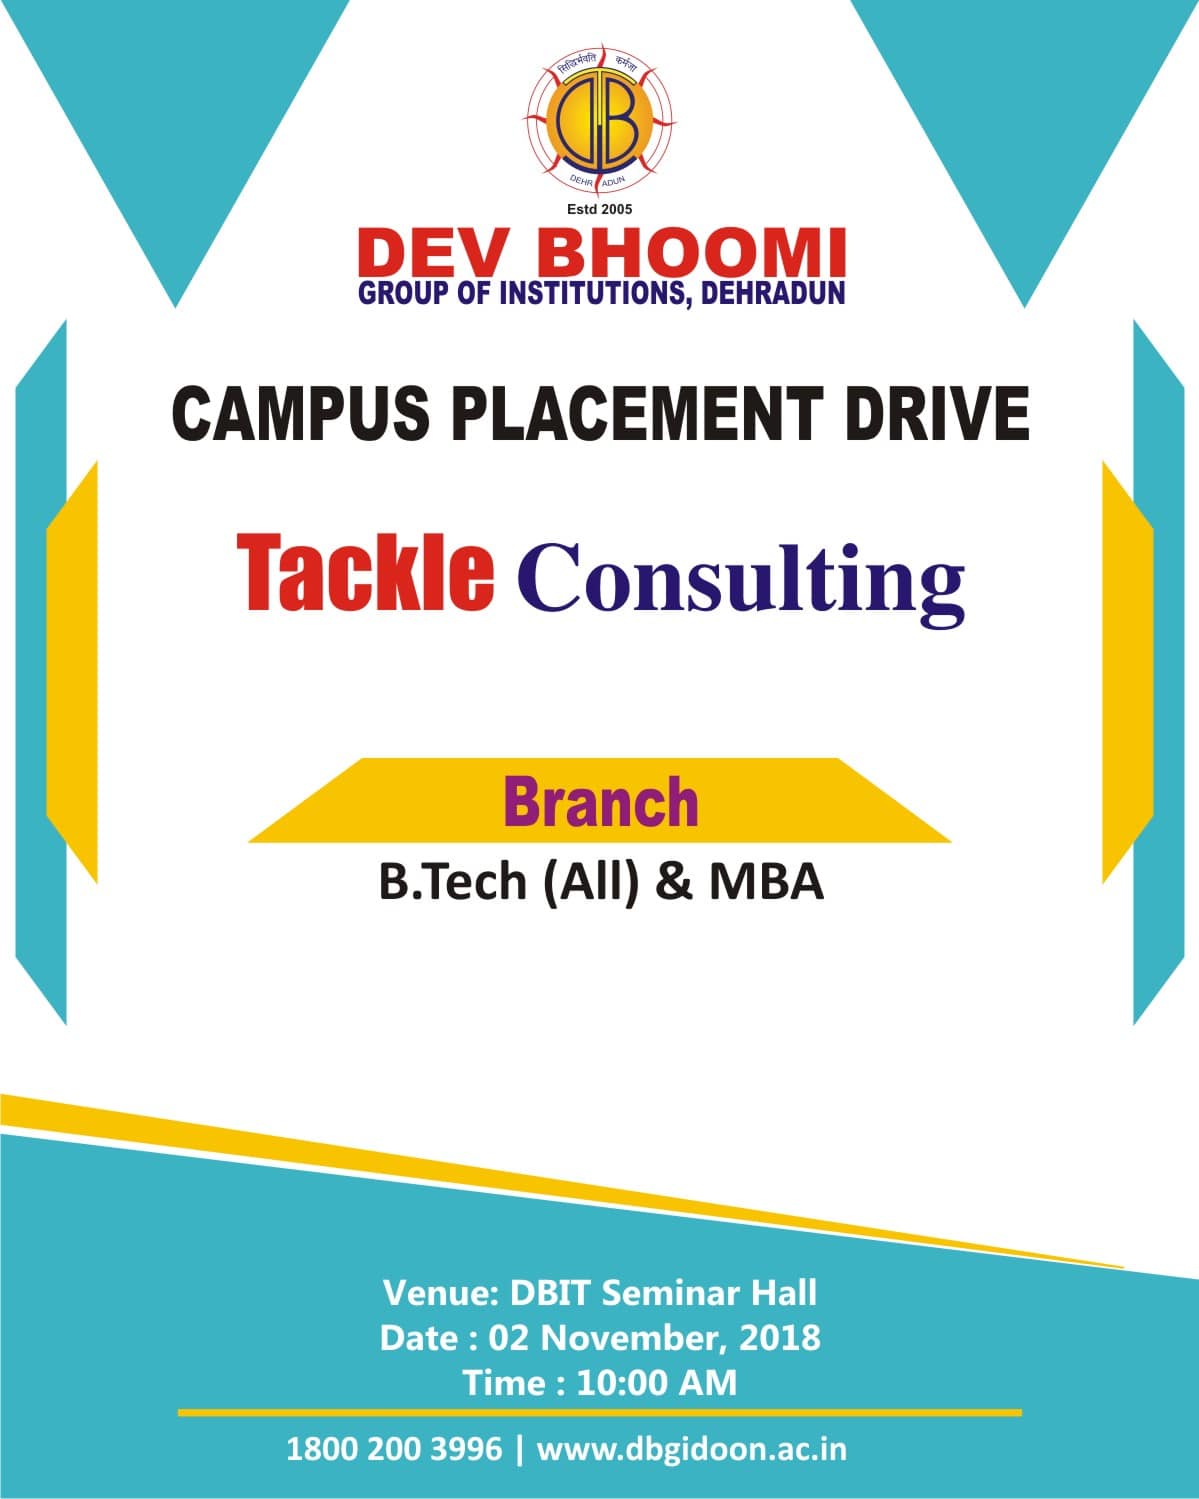 Campus Placement Drive of Tackle consulting